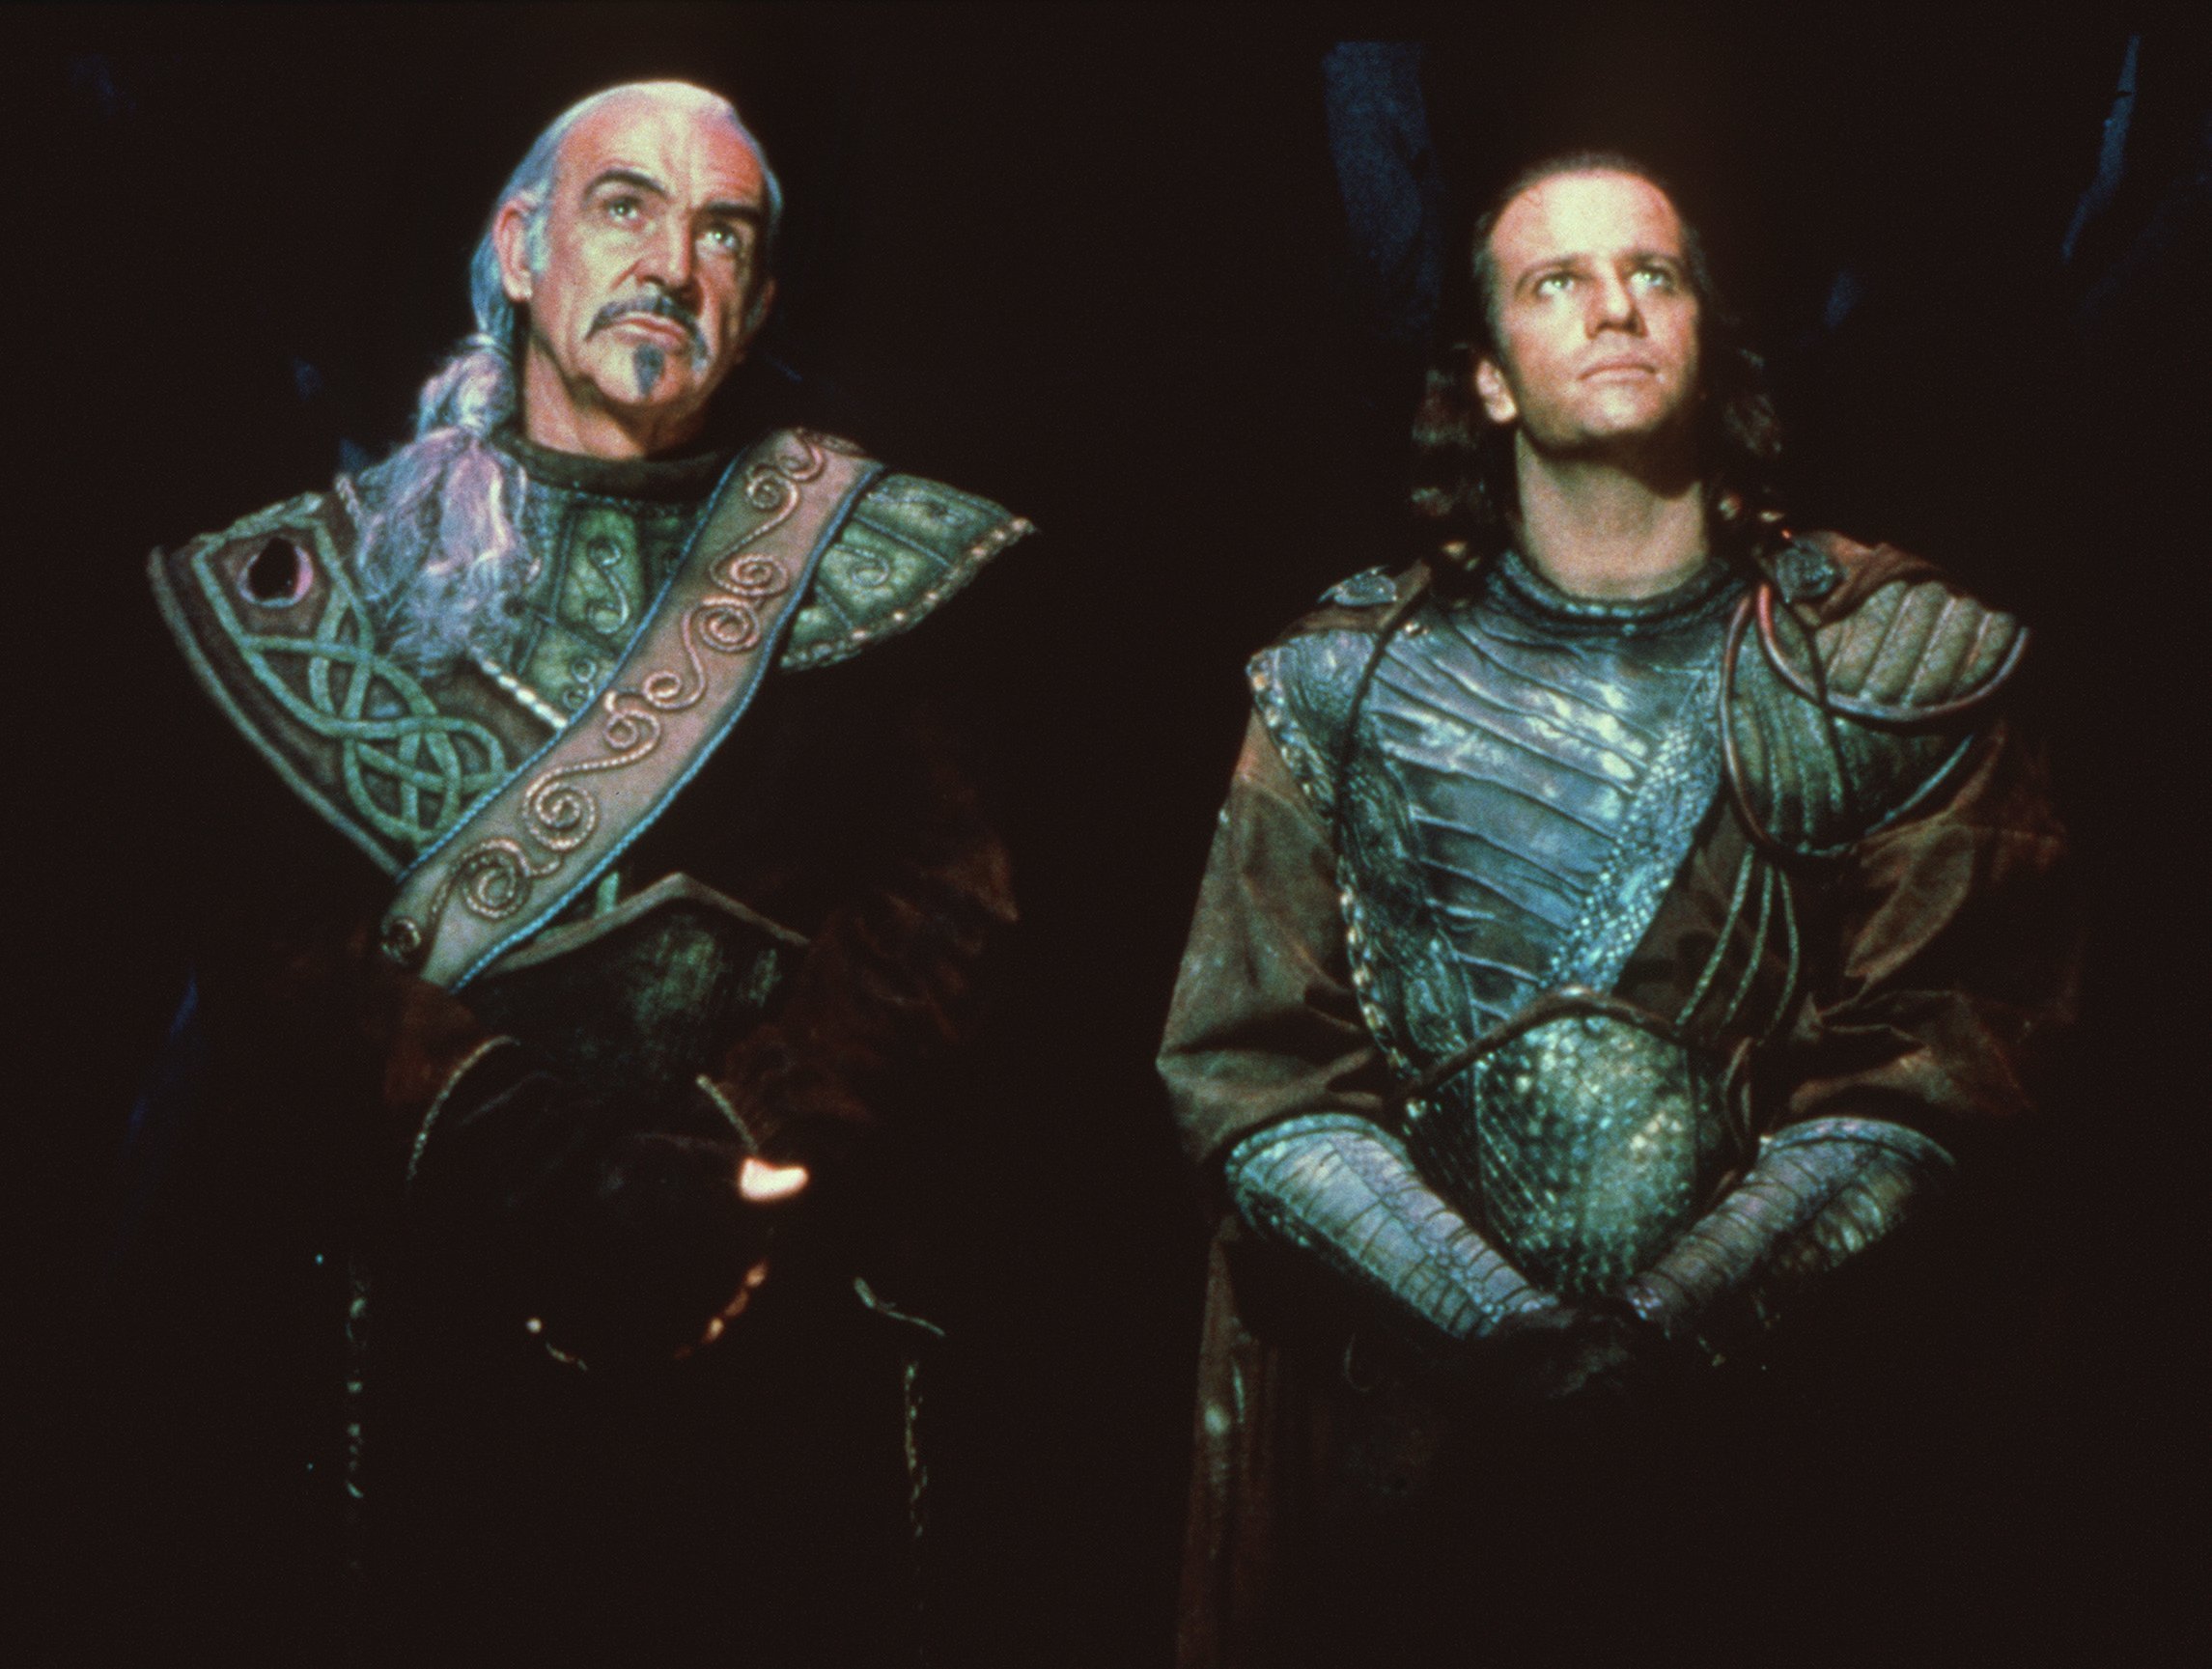 Starring Christopher Lambert and Sean Connery, the original <em>Highlander</em> film from 1986 was pretty decent. While some people may not have loved it due to its corny antics, others loved it for those same moments. Unfortunately, director Russell Mulcahy opted to make a sequel five years later. <em>Highlander II: The Quickening</em> sees Lambert's Connor MacLeod tasked with preventing the destruction of Earth. Set in 2024, nearly the entire ozone above Earth has dissipated. As a result, MacLeod helps build a shield to protect Earth. Between the time hops, absurd SFX, and brutal performances, <em>Highlander II</em> is unwatchable -- even for those who loved the original.